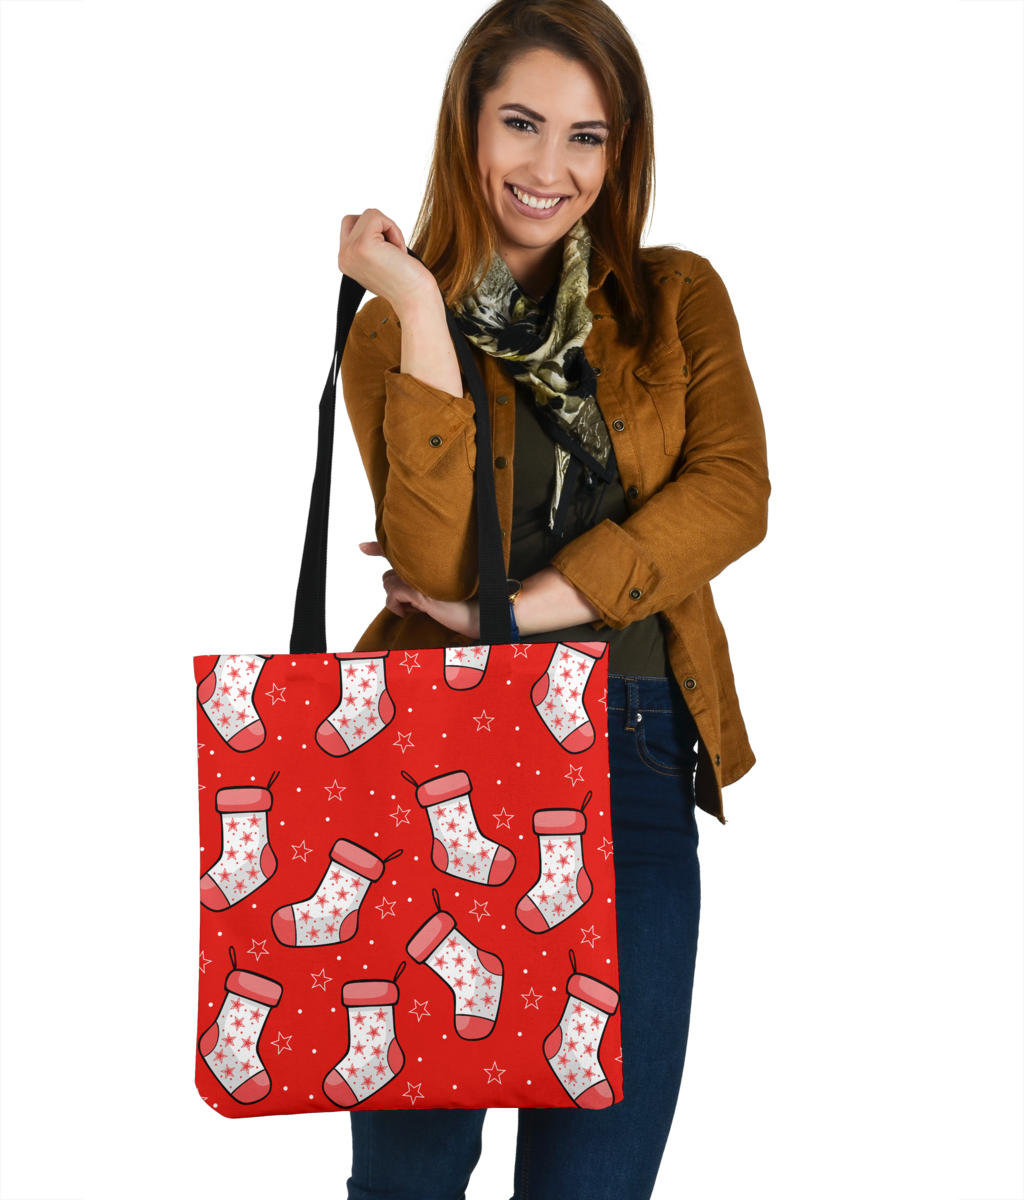 Red Stockings Linen Tote Bag